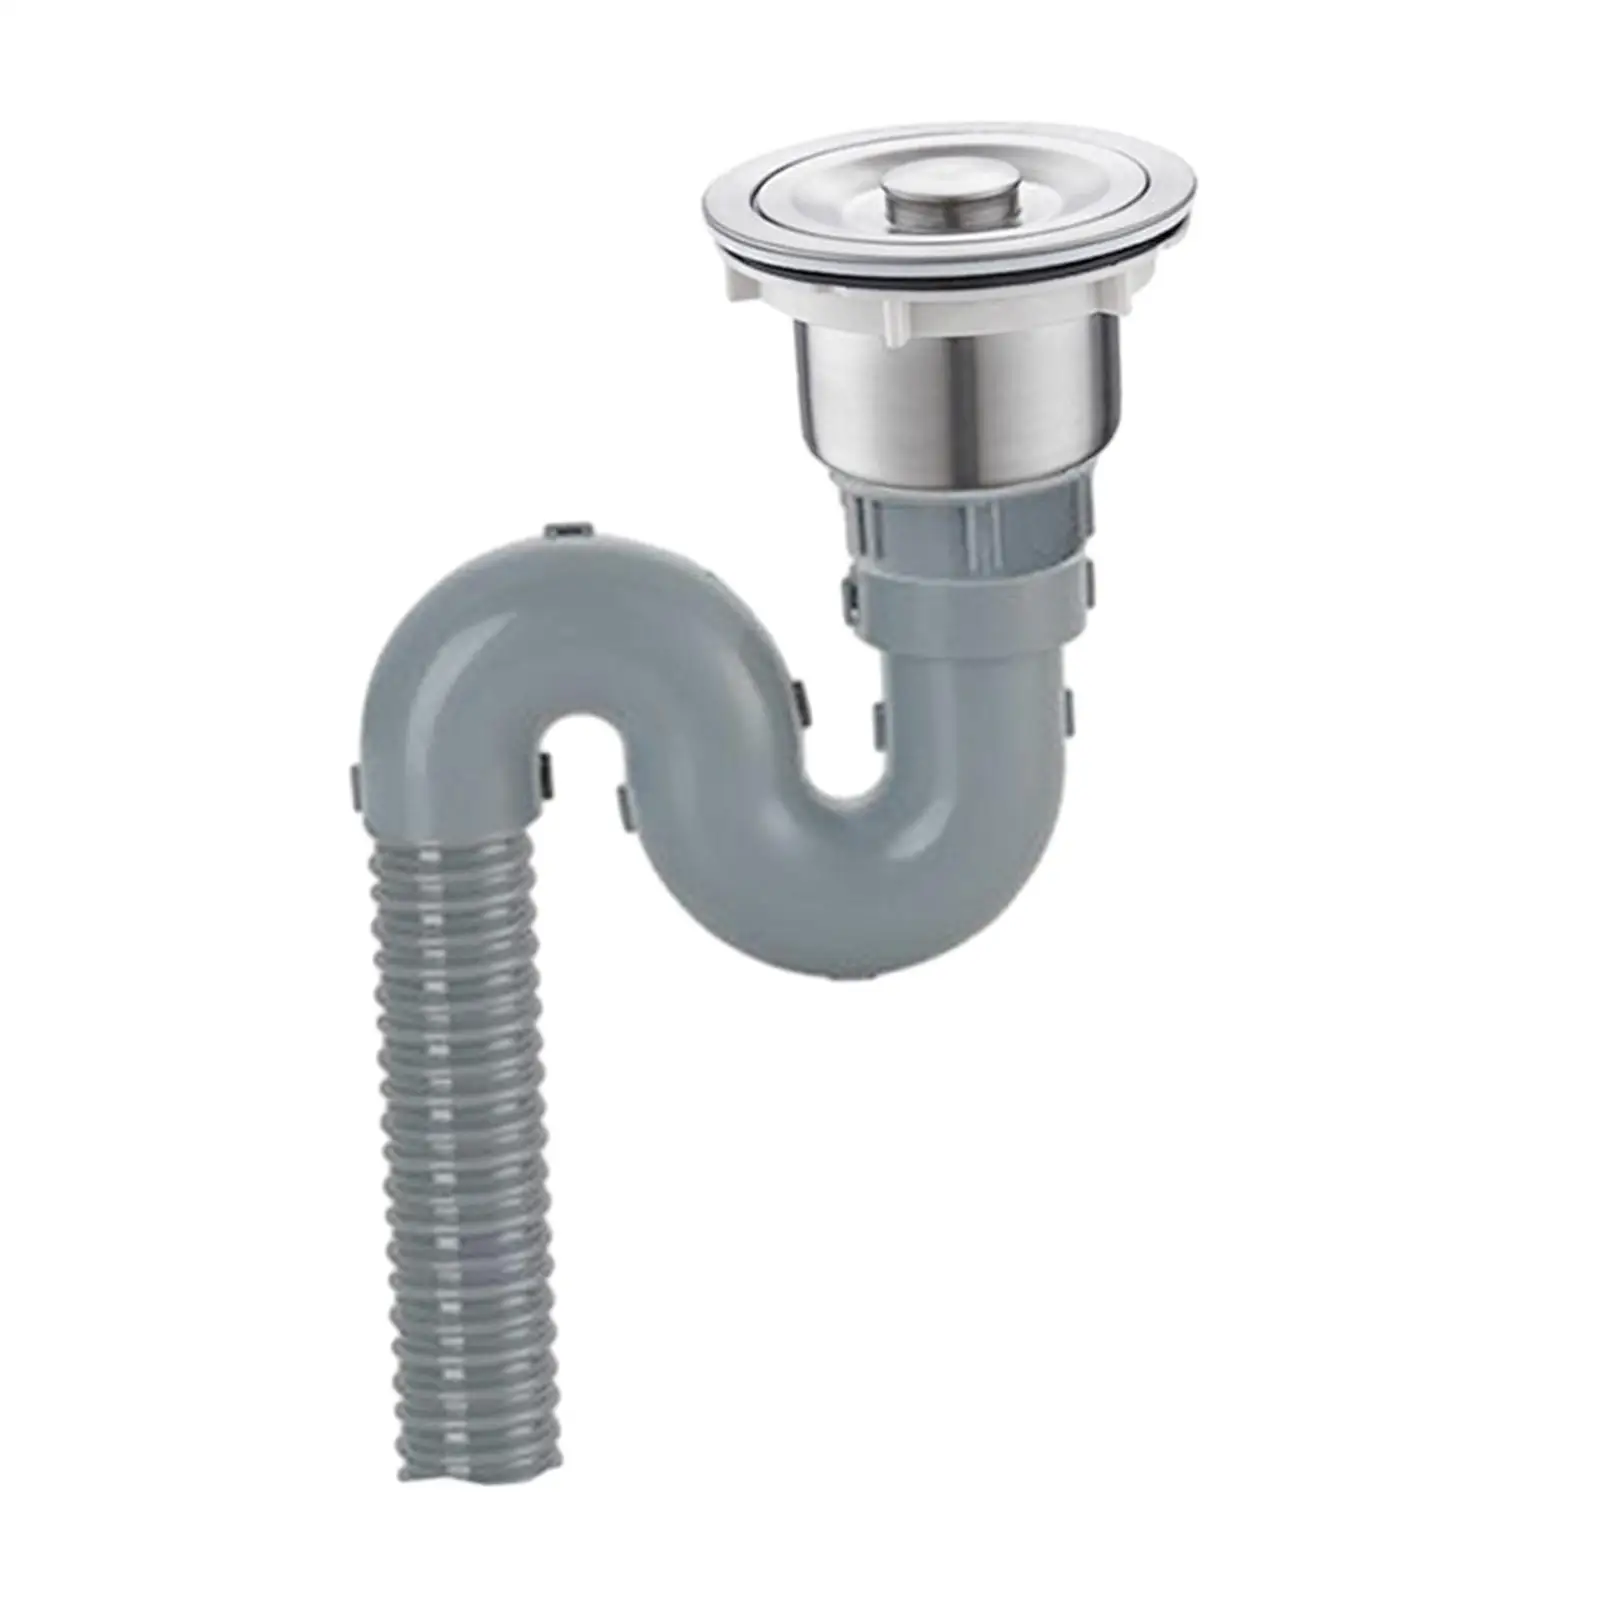 Sink Drain Pipe Sink Strainer Universal Waste Water Pipe for Sink Home Sewer